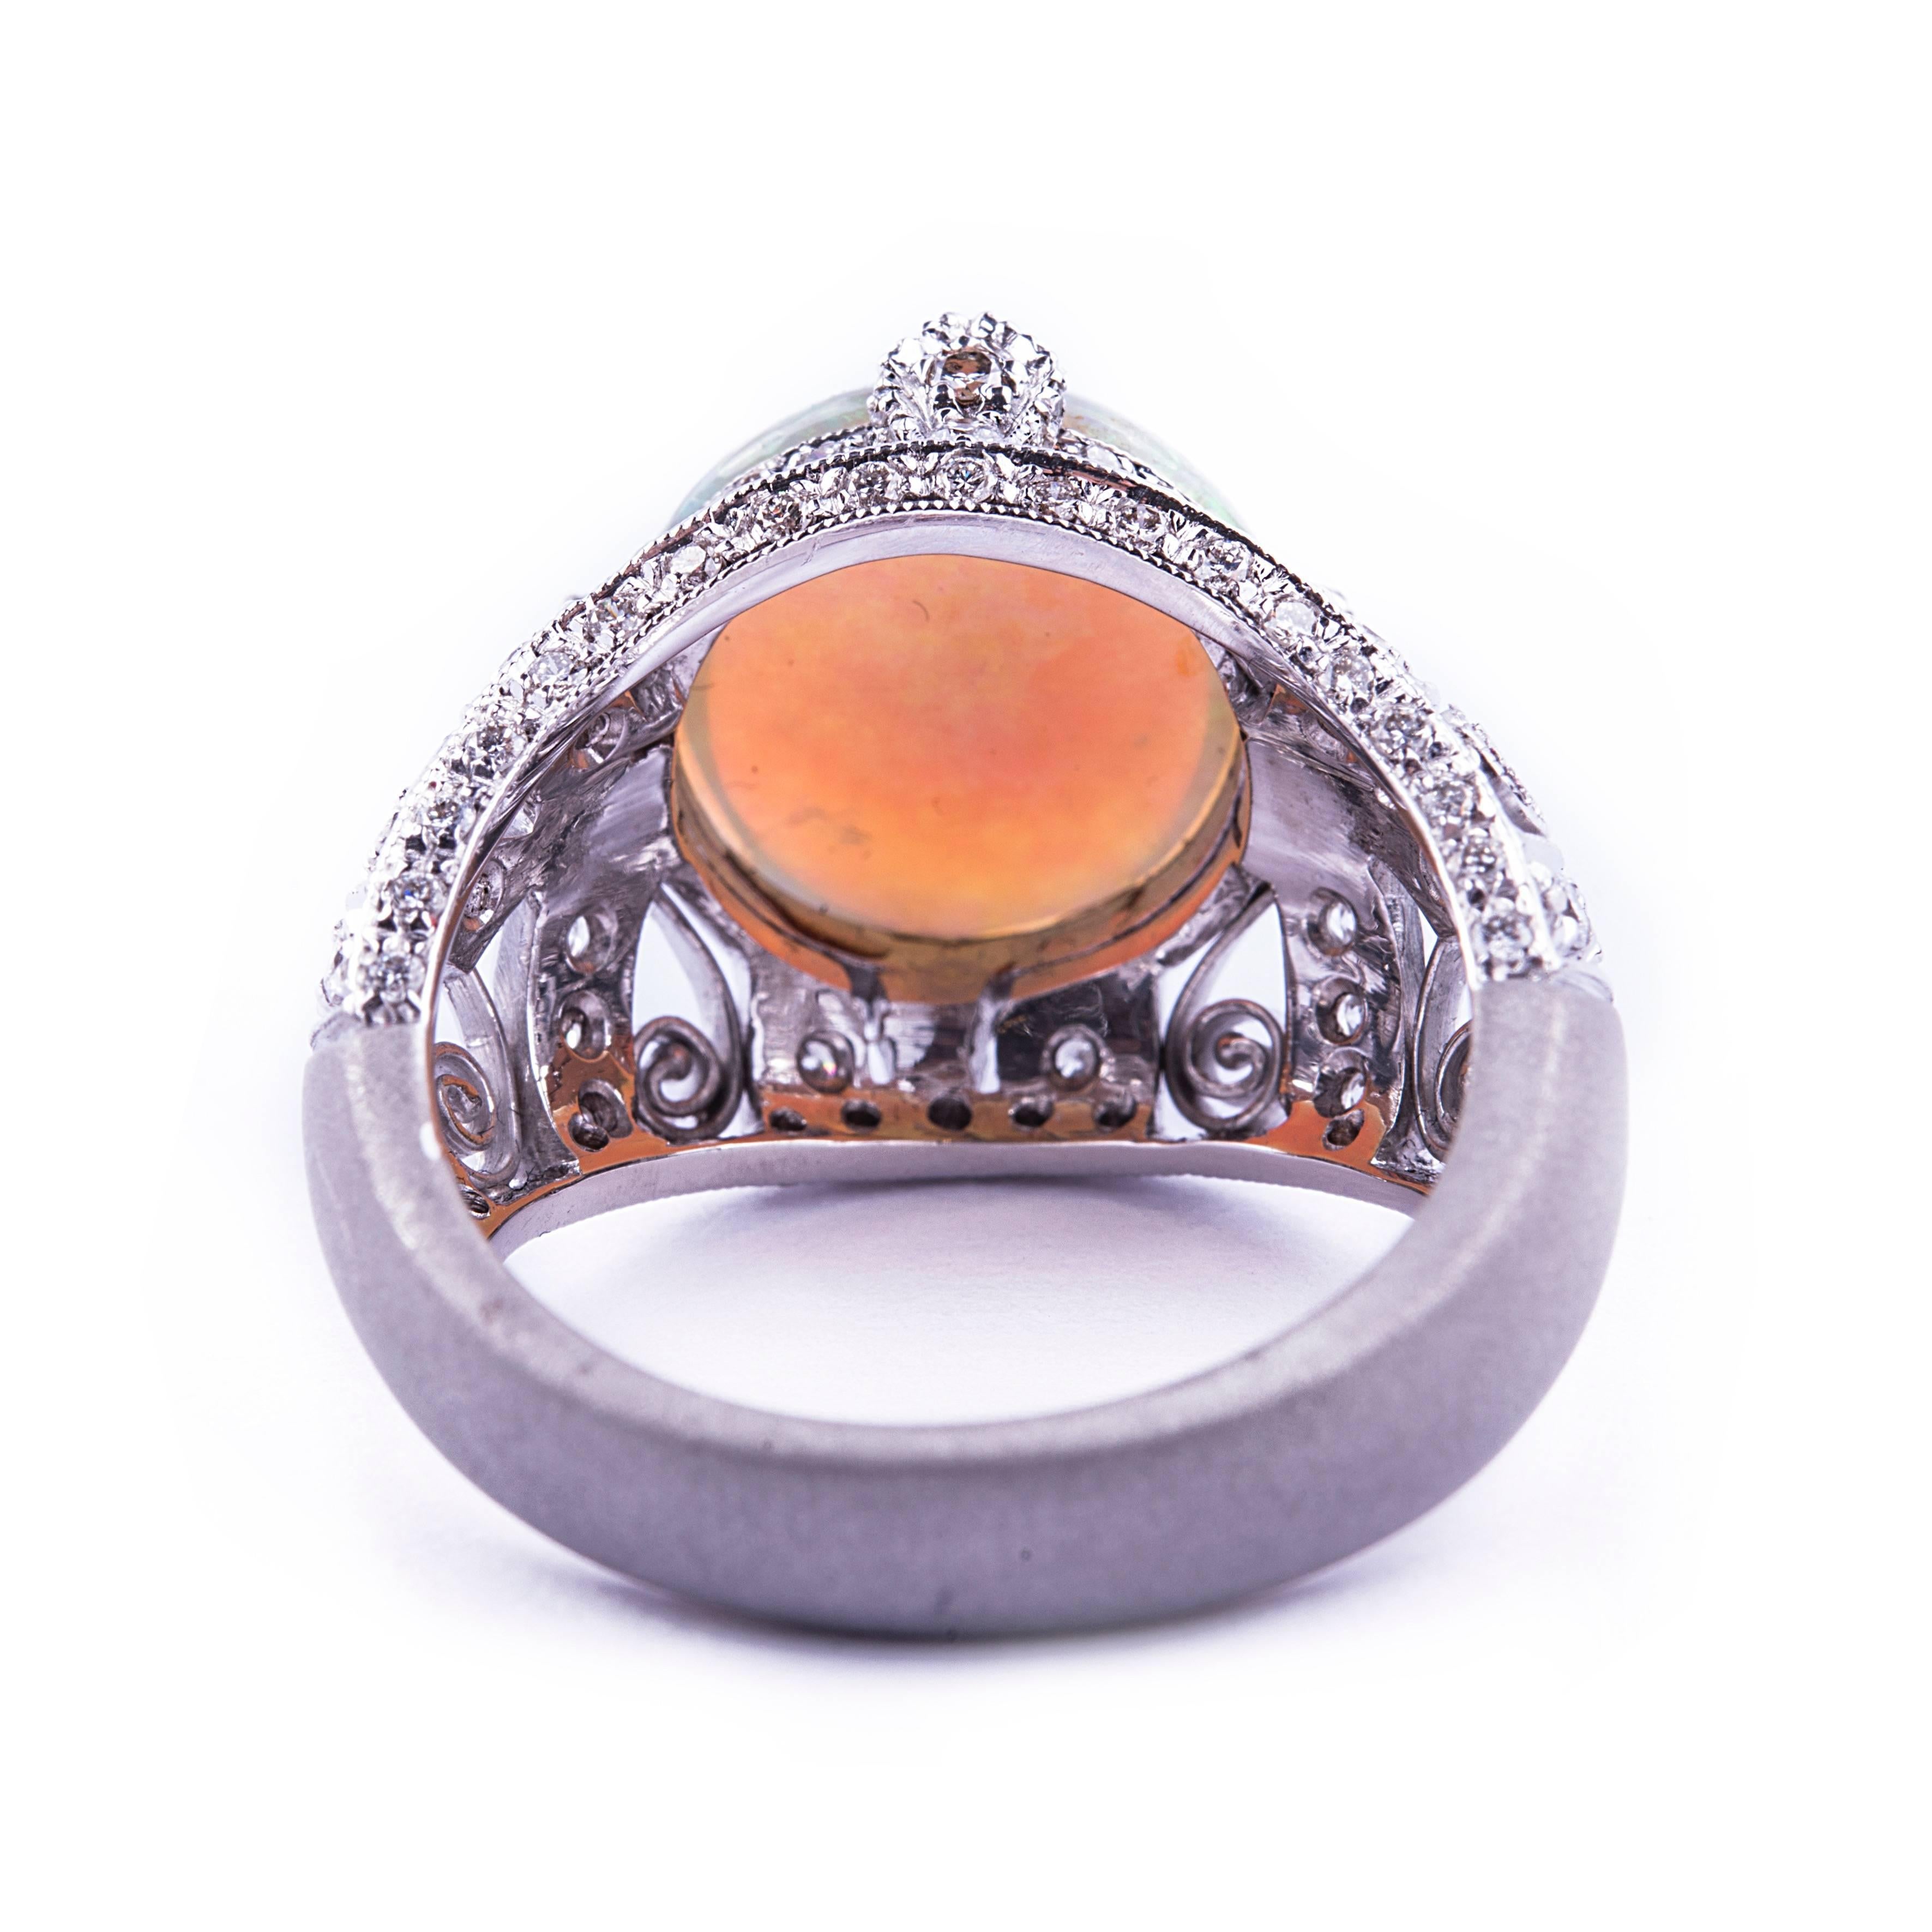 An Art Deco inspired 18kt gold mounting set with 84 diamonds weighing 1.02 ct  and centered with a beautiful opal.